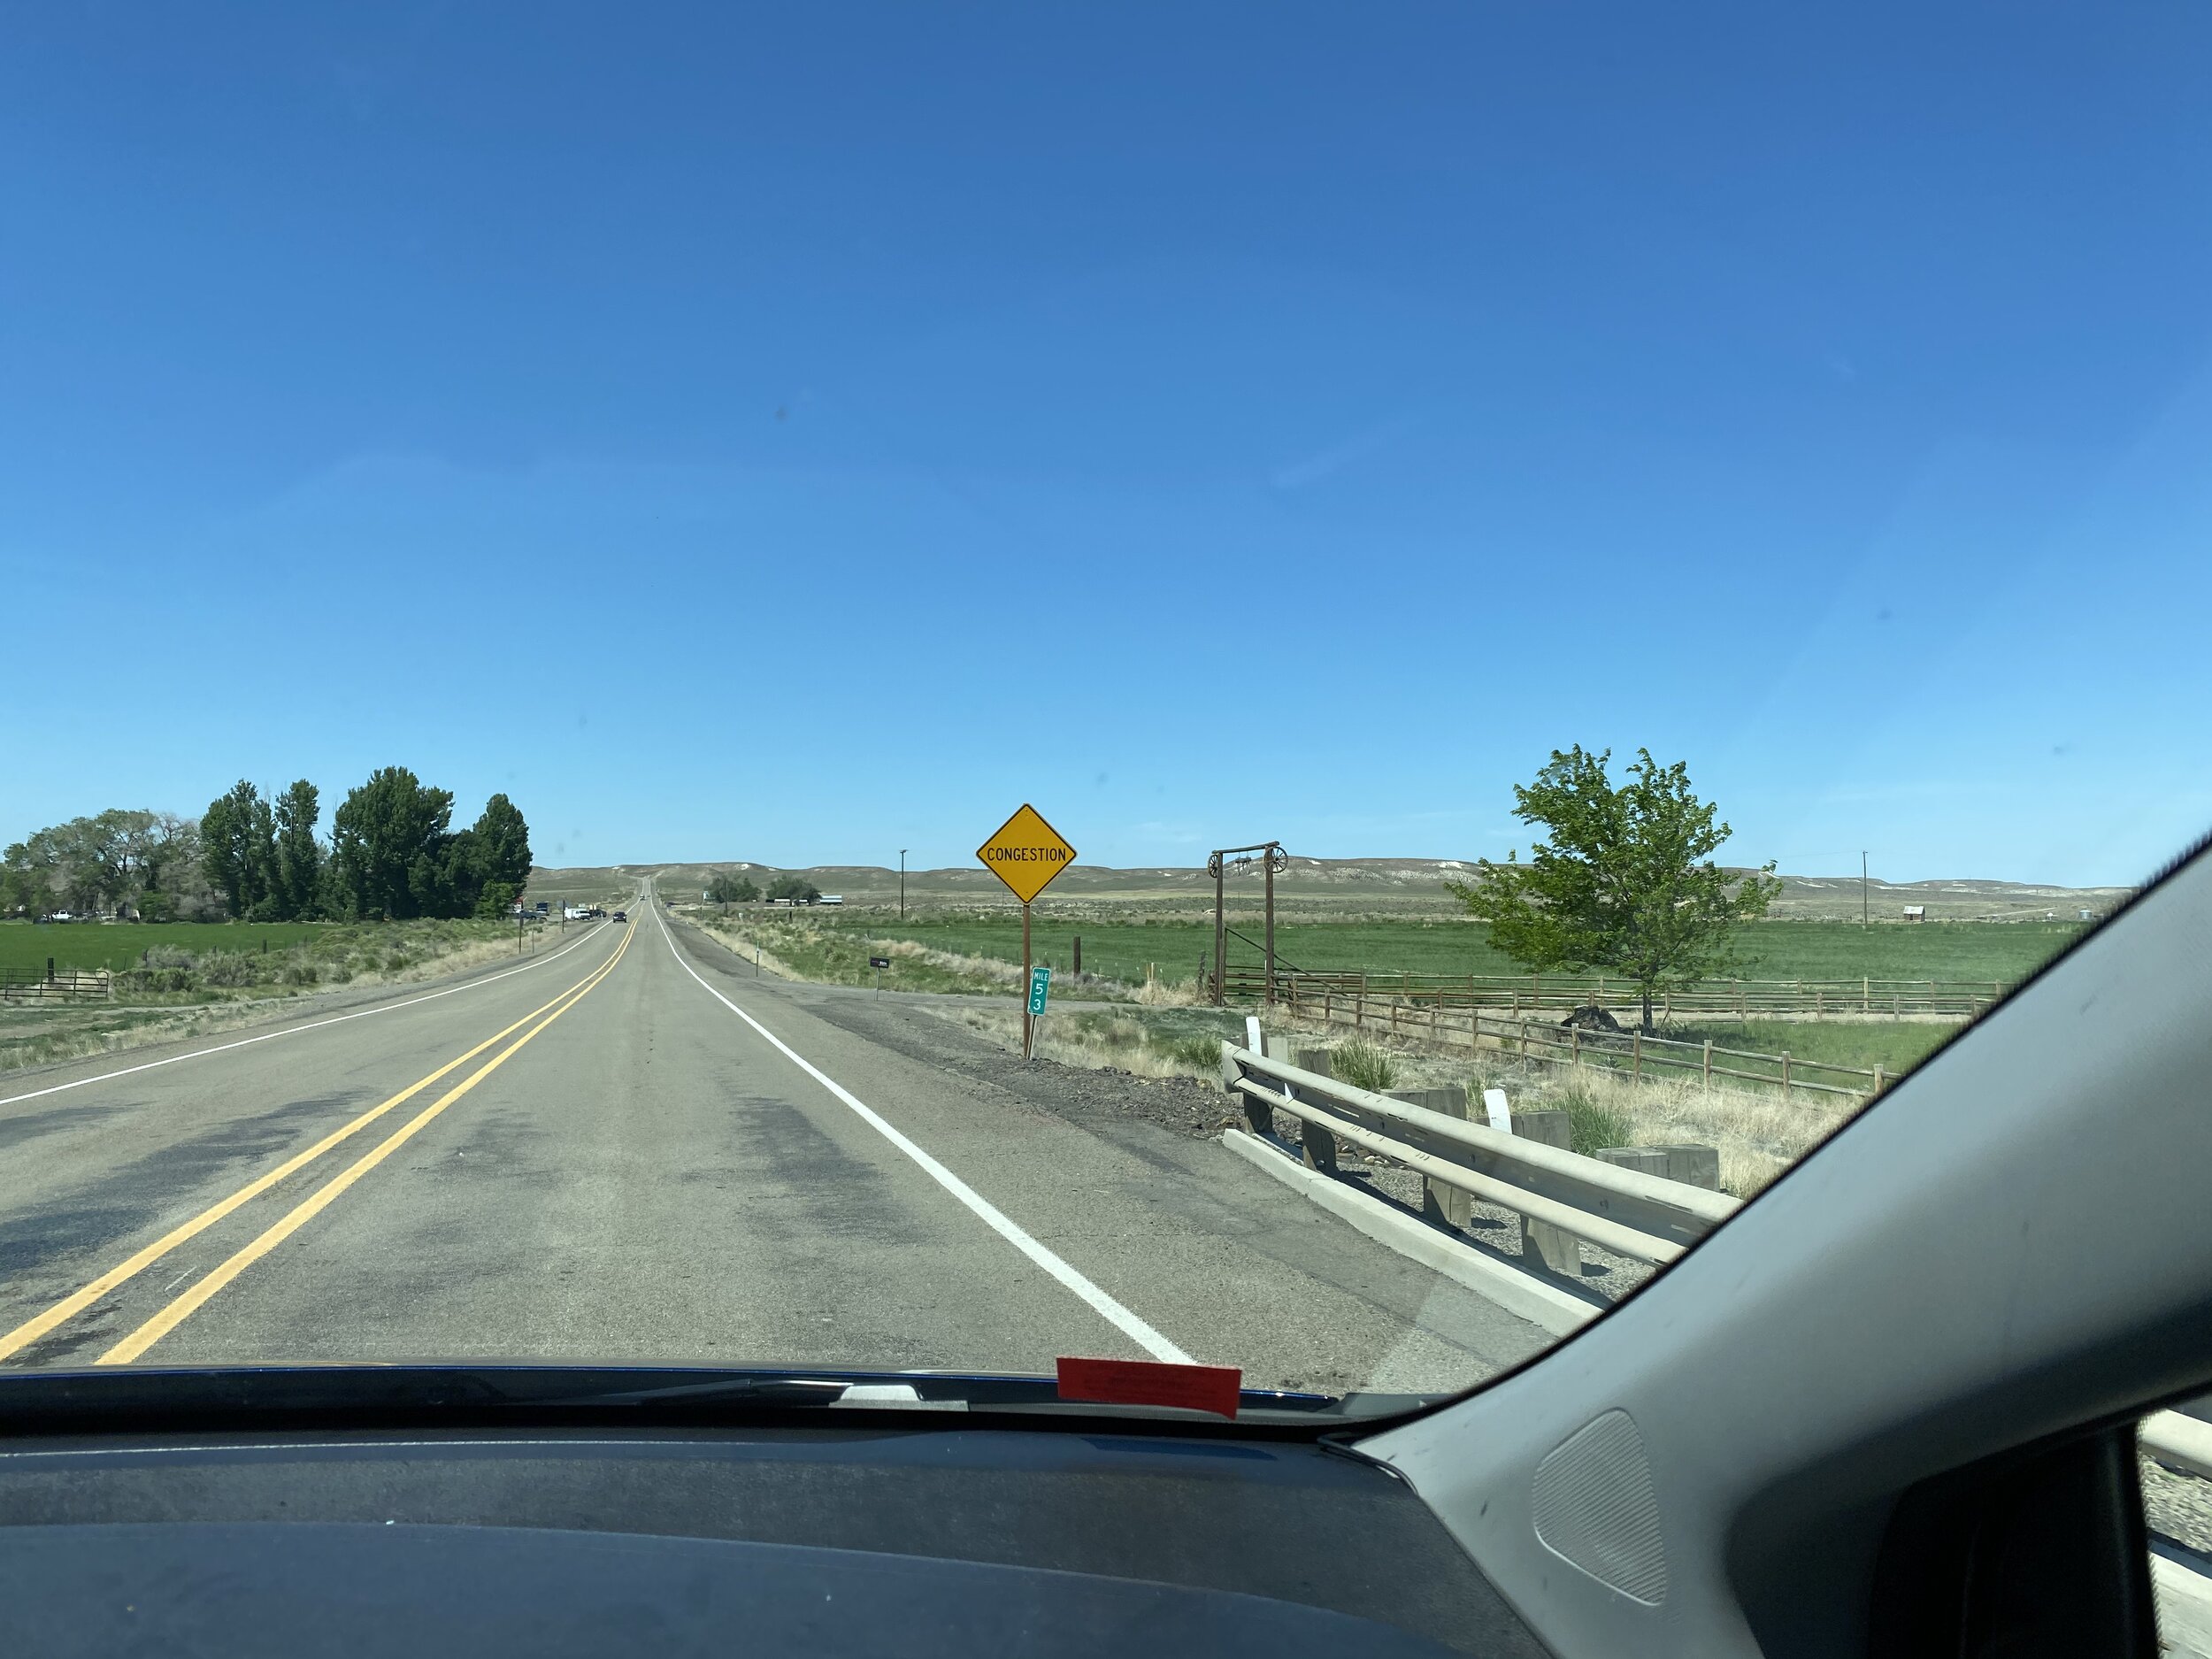 The sign warning of the upcoming congestion seemed rather relative for the area.  (Again, Jordan Valley, Oregon.)  Photo by Karen Boudreaux, June 4, 2021